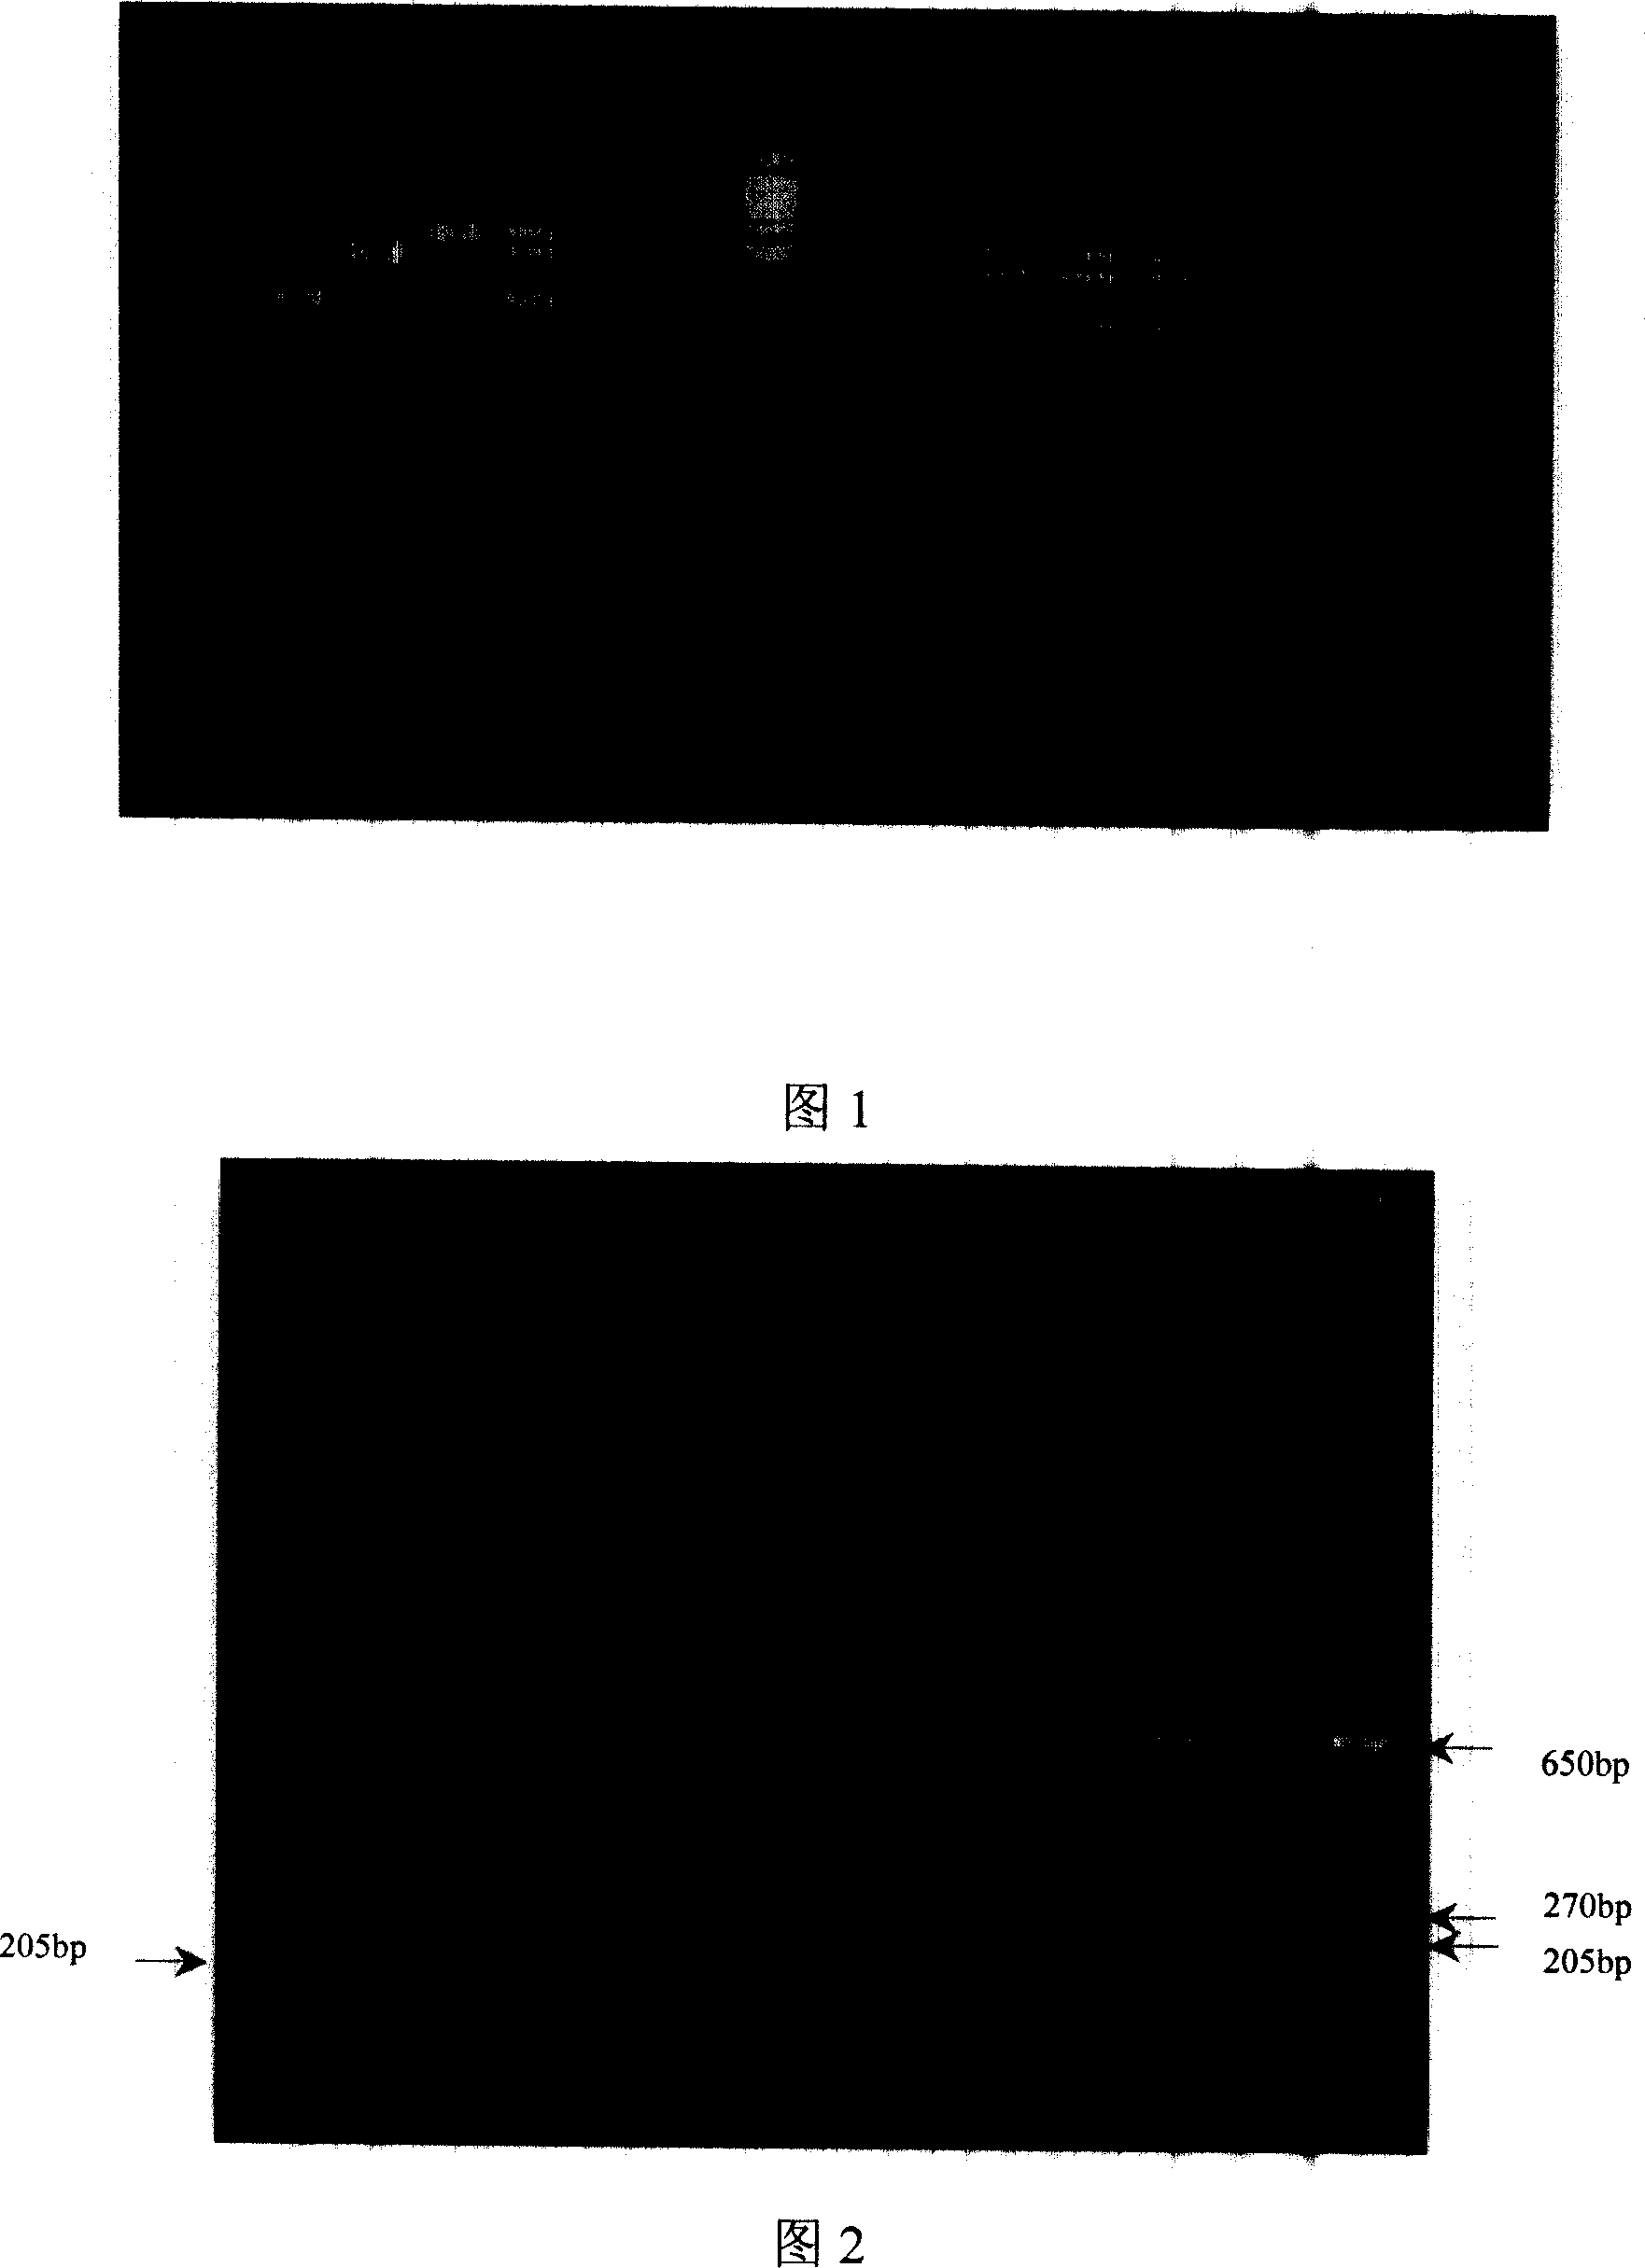 Kit and process for PCR amplification detecting type 2 pig streptococcus virulence gene